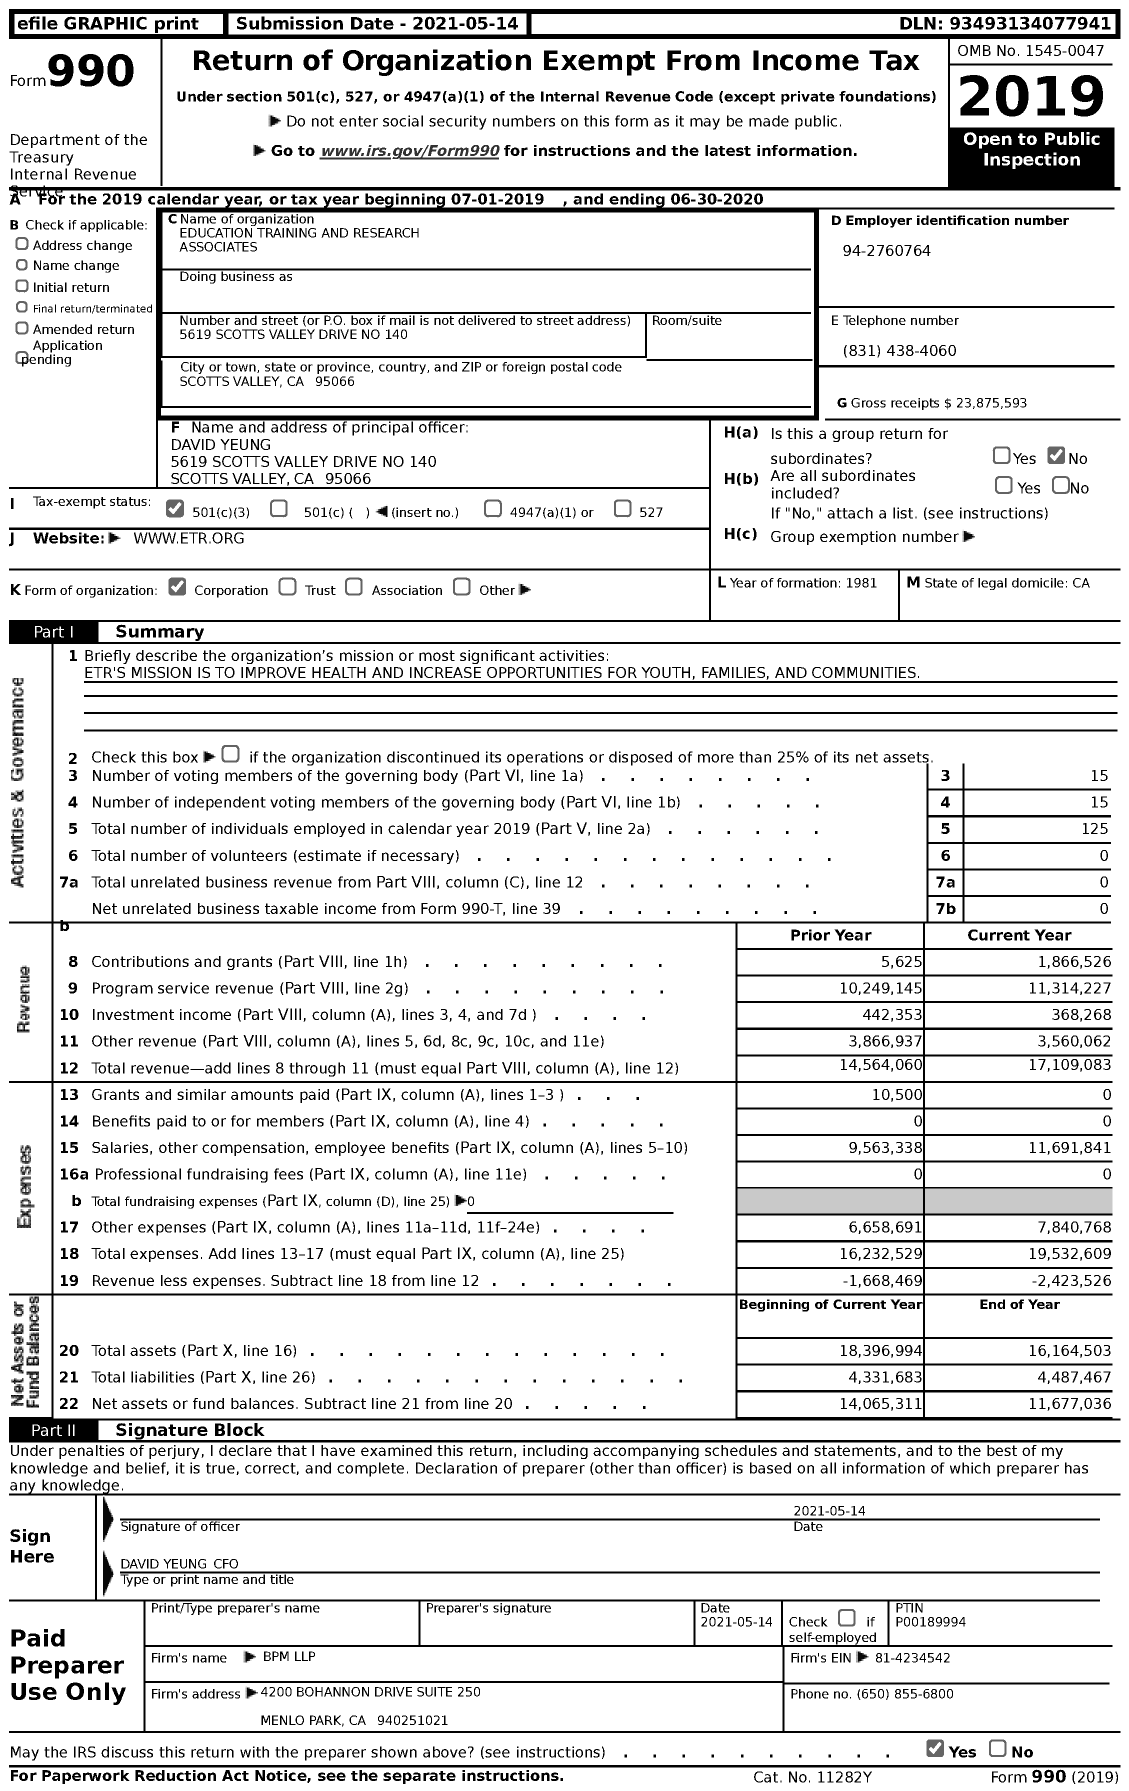 Image of first page of 2019 Form 990 for Education Training and Research Associates